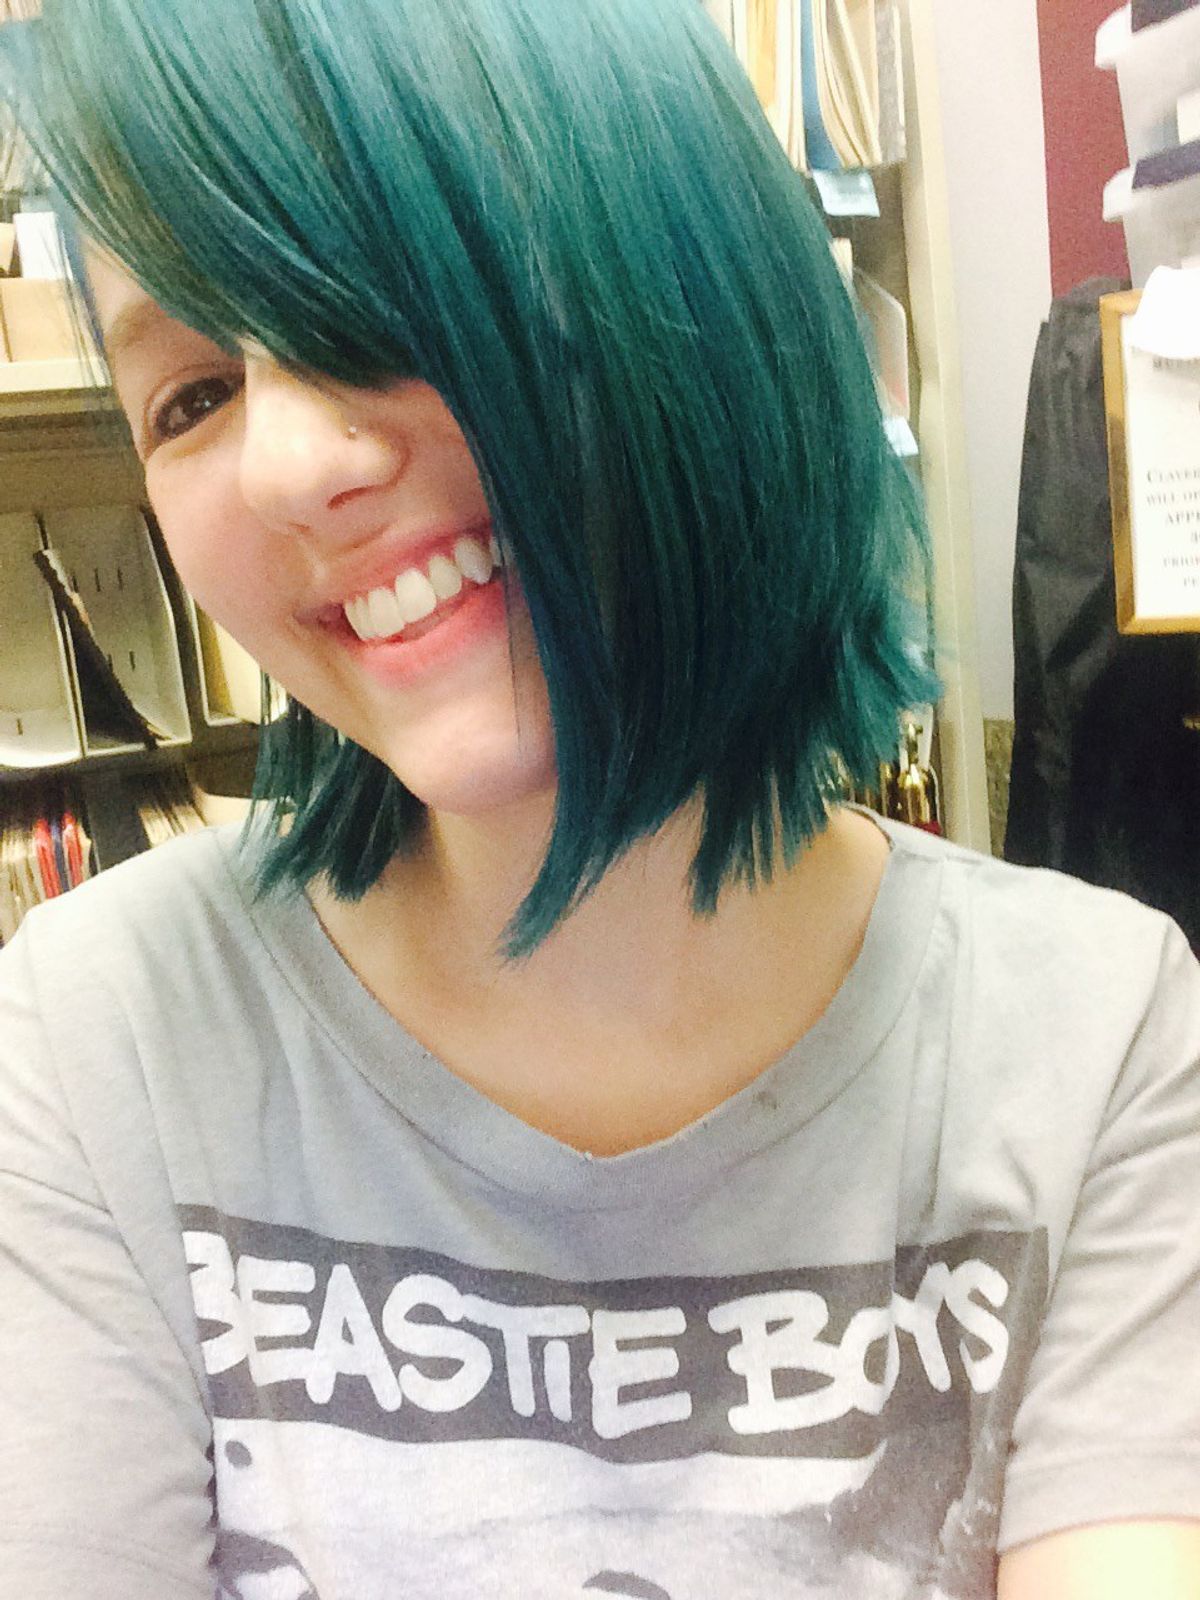 Dying my Hair Blue Helped me Through a Breakup